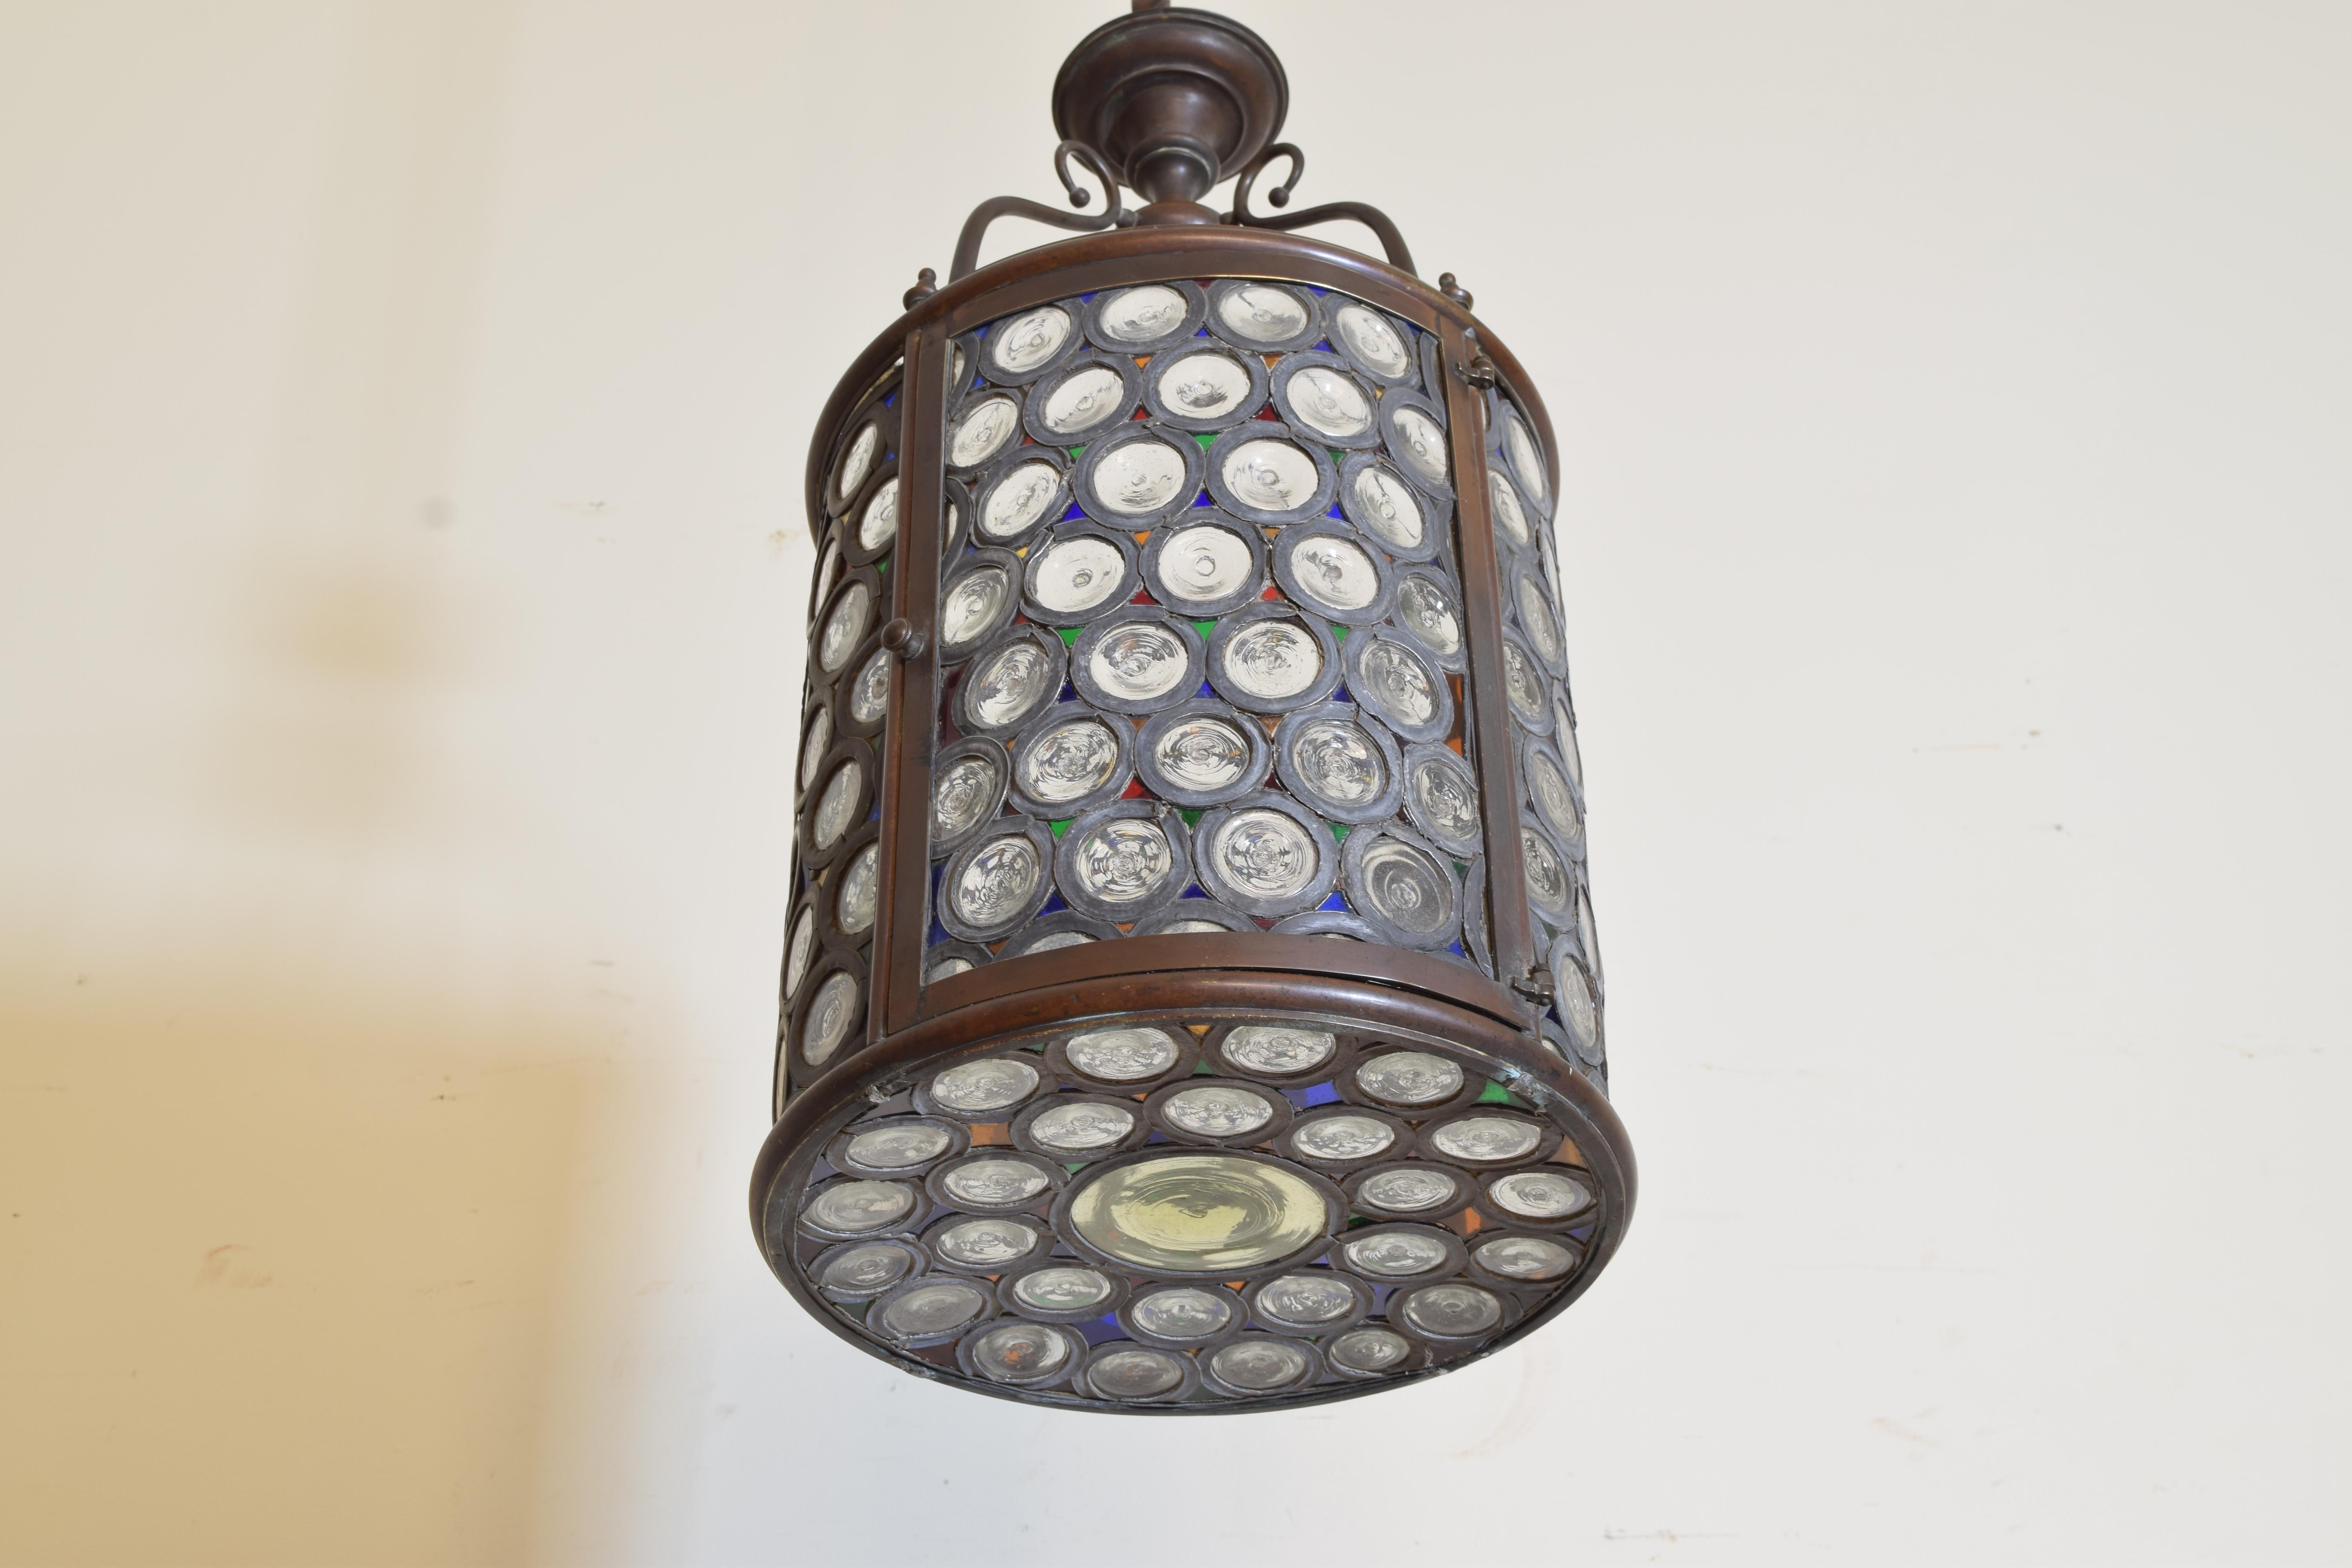 Late 19th Century Italian Baroque Revival Period Patinated Brass & Colored & Leaded Glass Lantern